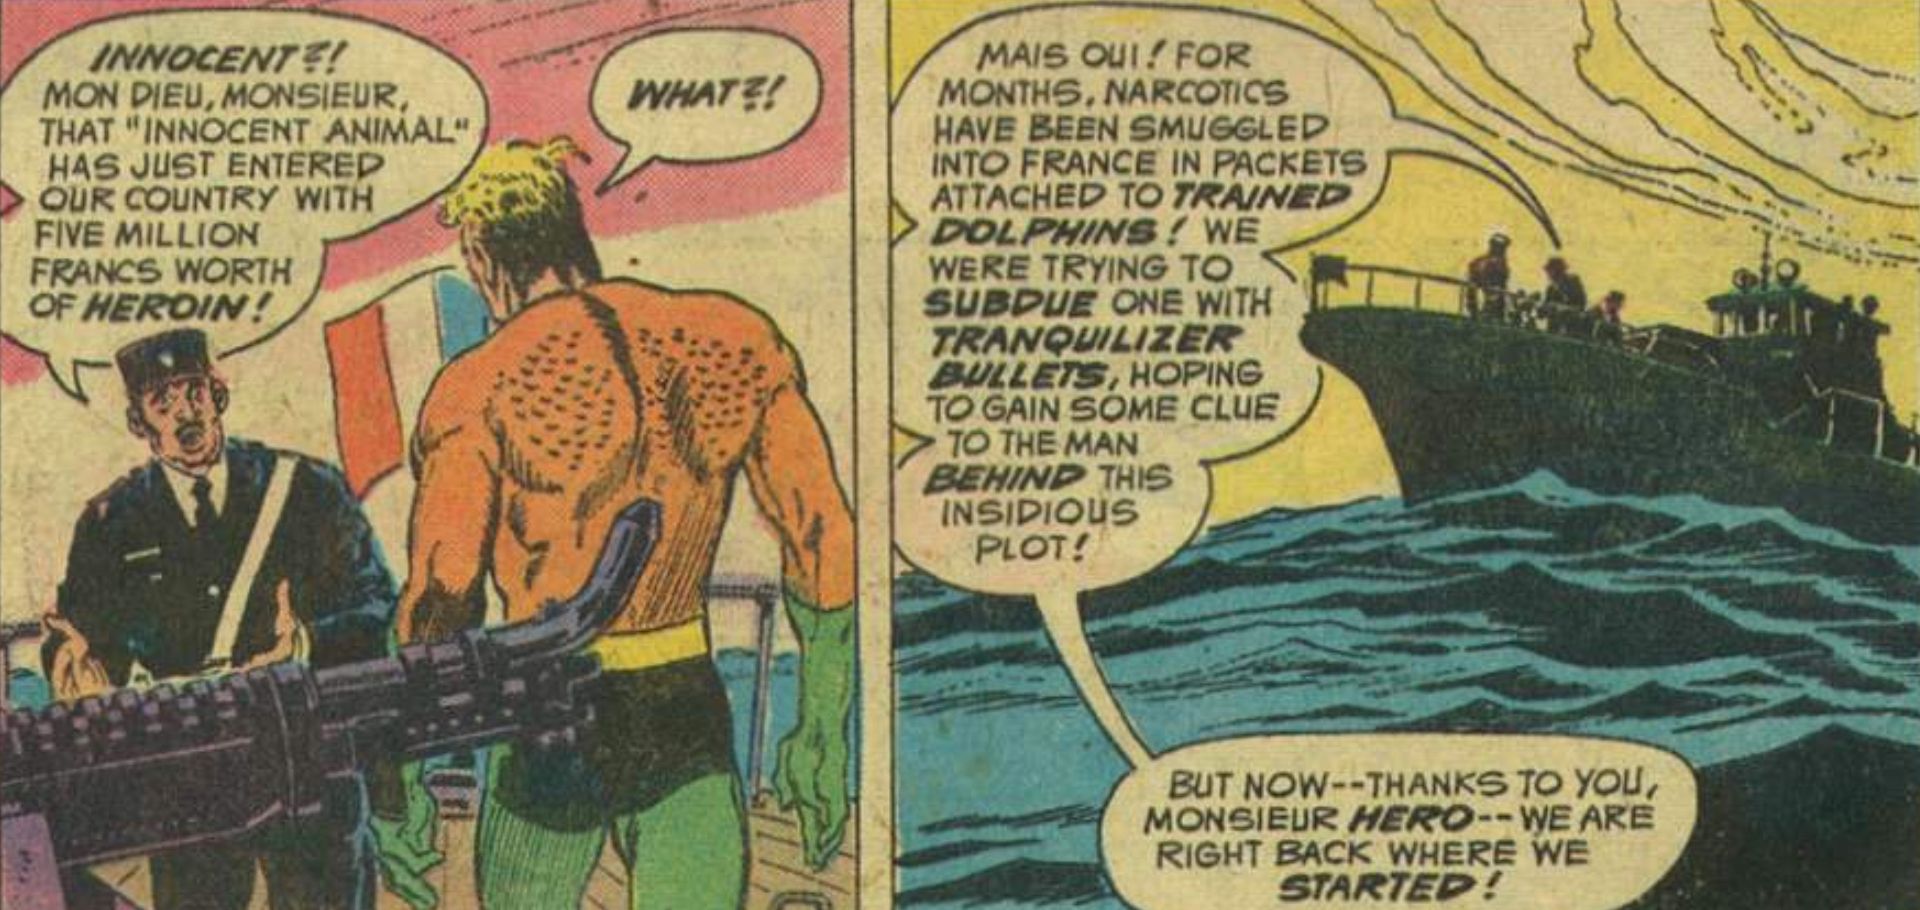 Aquaman and Drug Smuggling Dolphins in Adventure Comics Issue 443